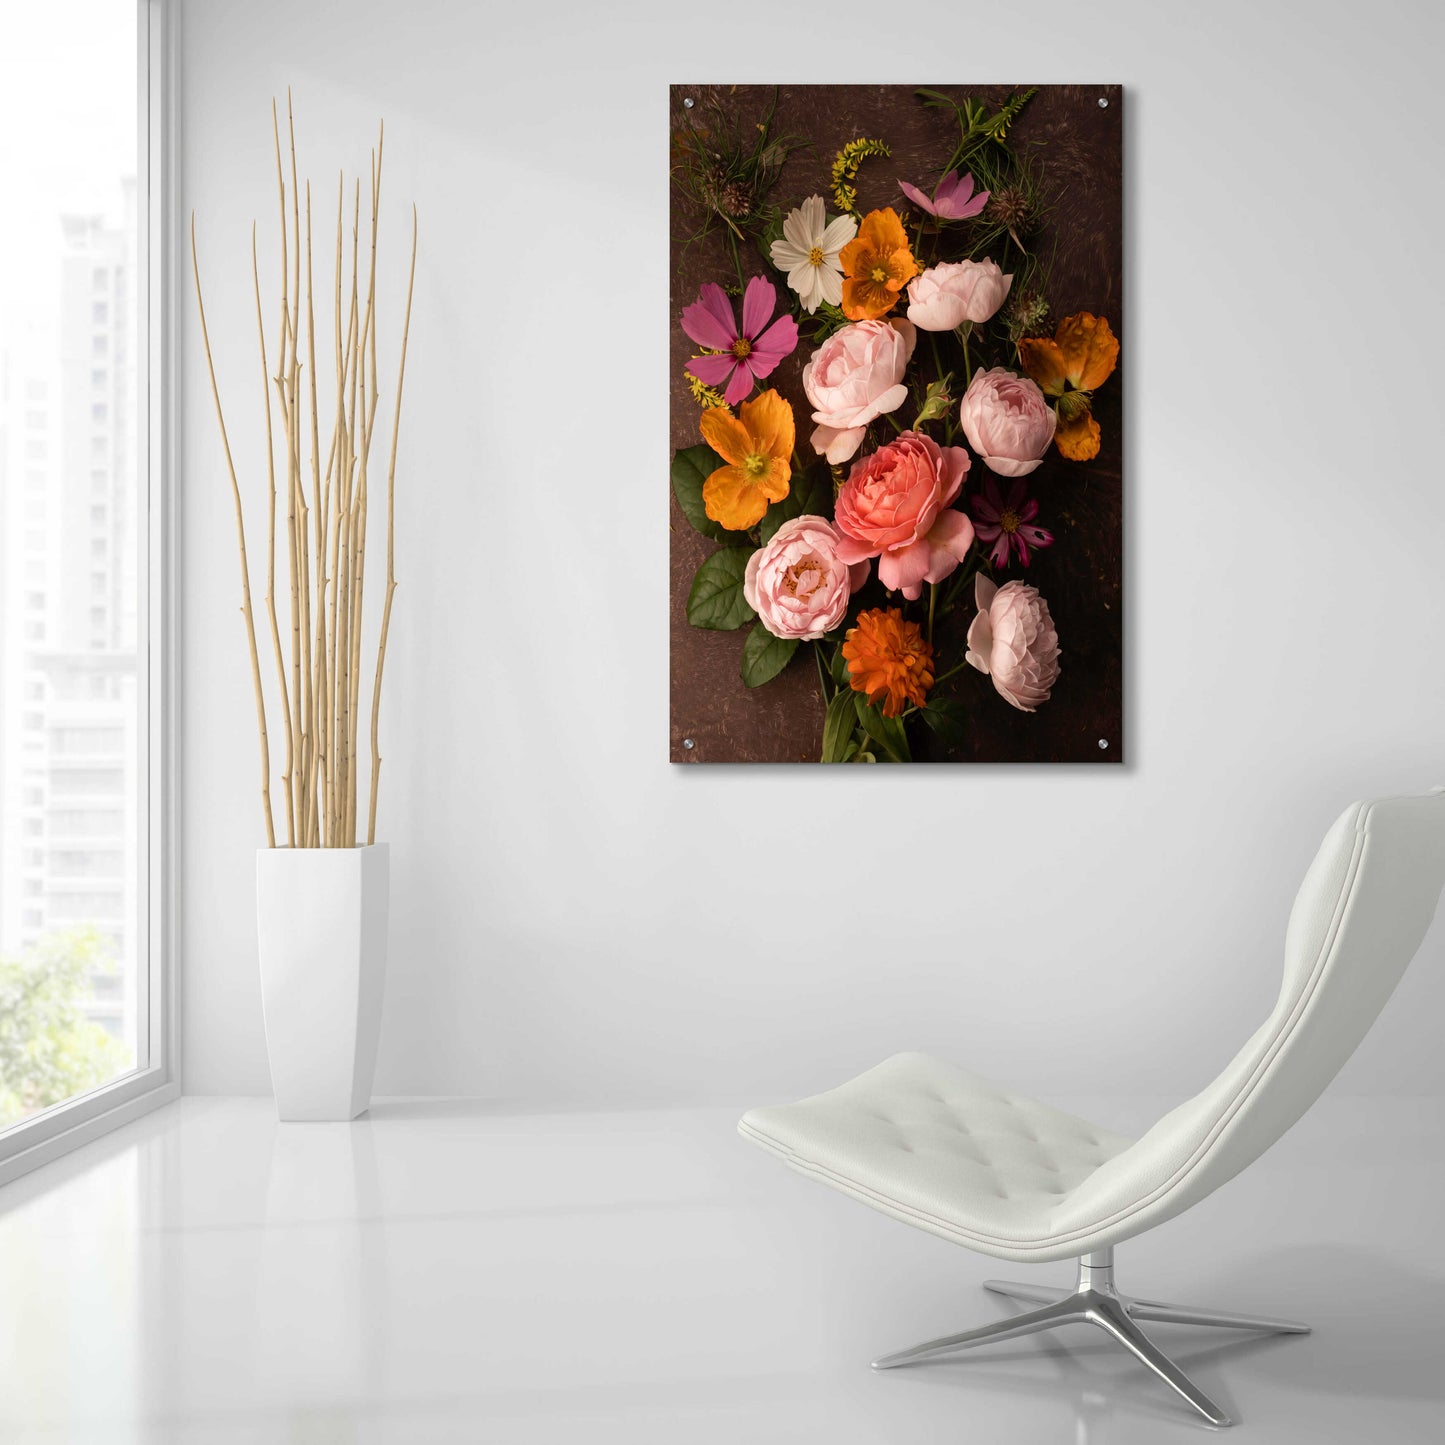 Epic Art 'A Pocket Full of Posies' by Leah McLean, Acrylic Glass Wall Art,24x36